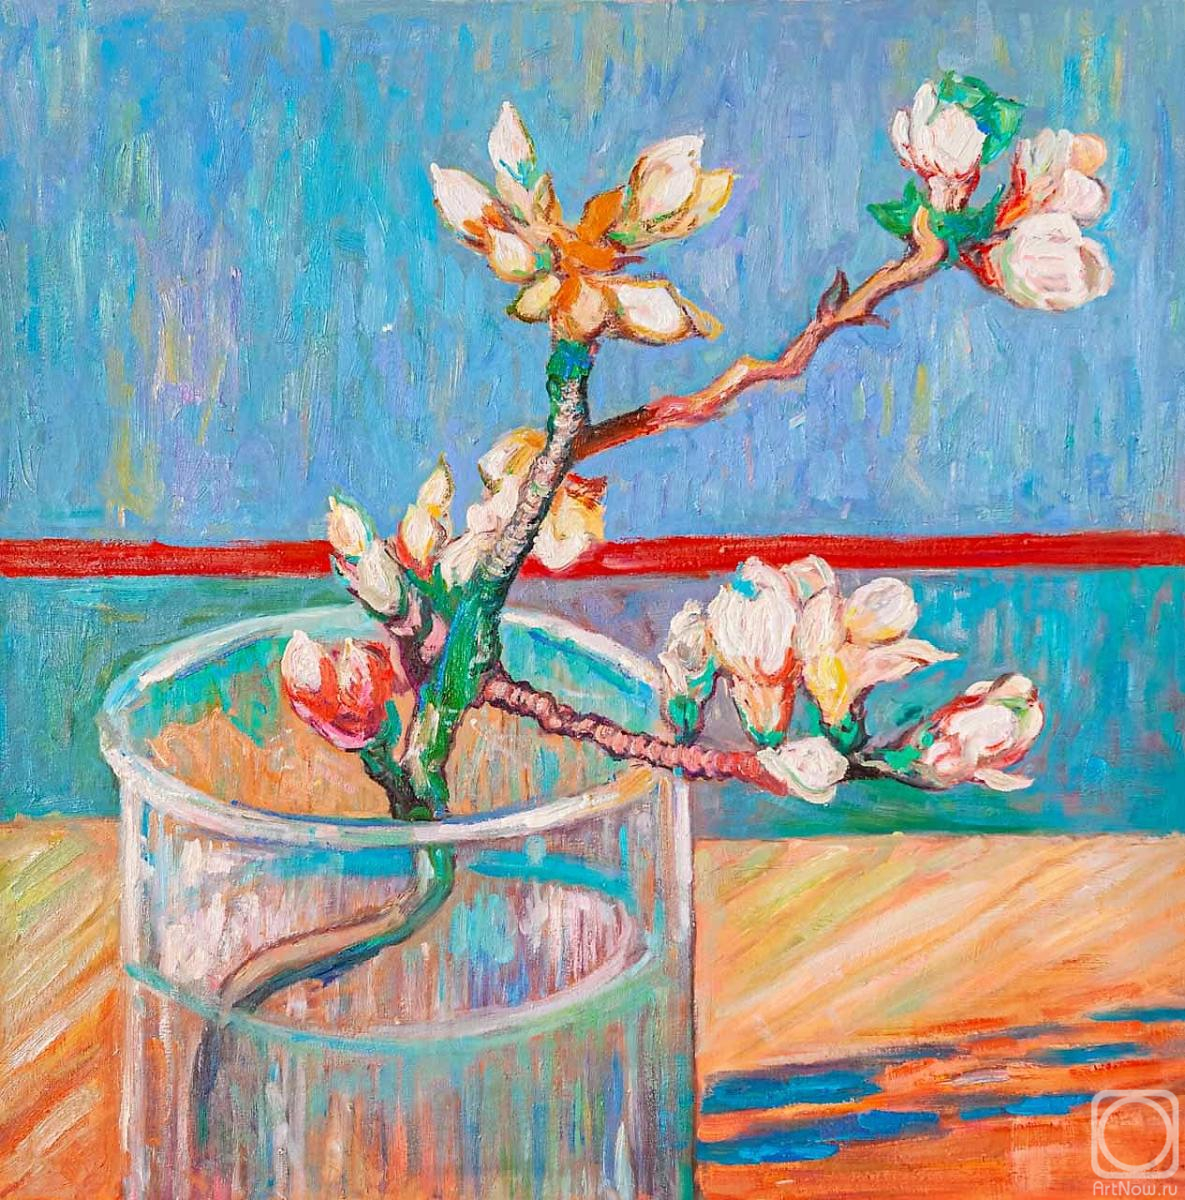 Vlodarchik Andjei. Copy of Van Gogh's painting *Blossoming almond branch in a glass*